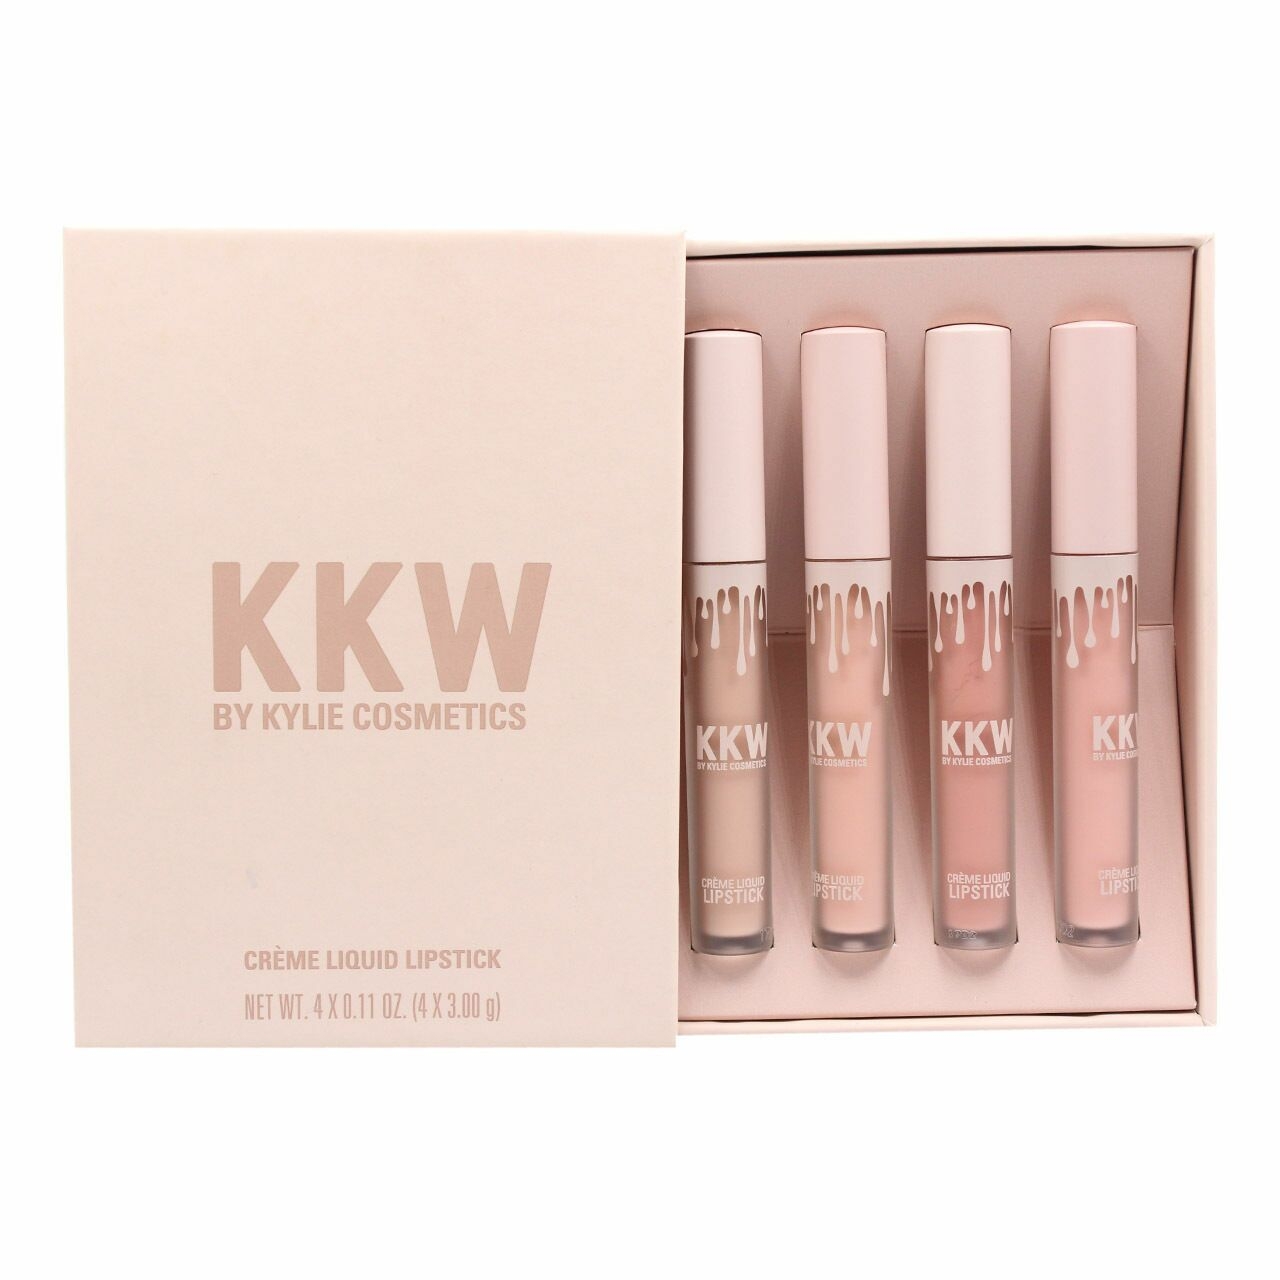 KKW By Kylie Cosmetics Creme Liquid Lipstick Sets and Palette